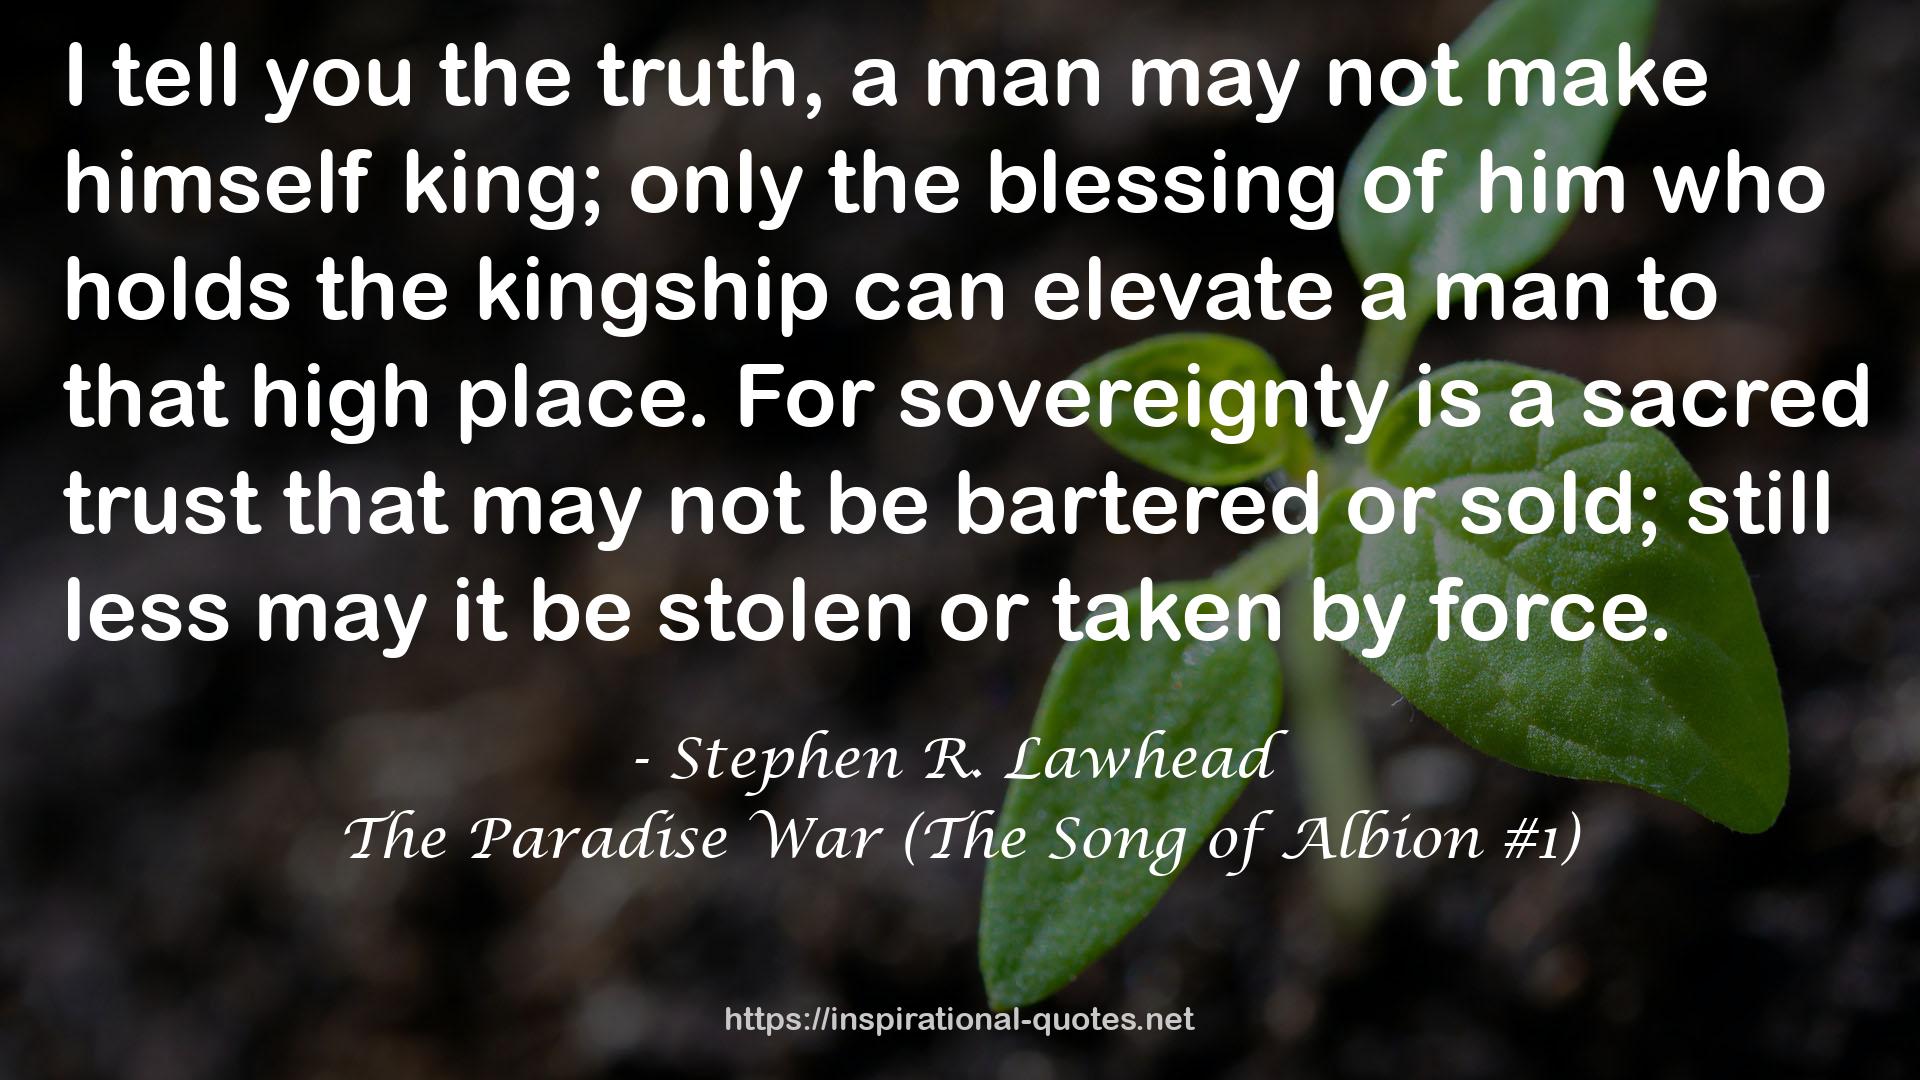 The Paradise War (The Song of Albion #1) QUOTES